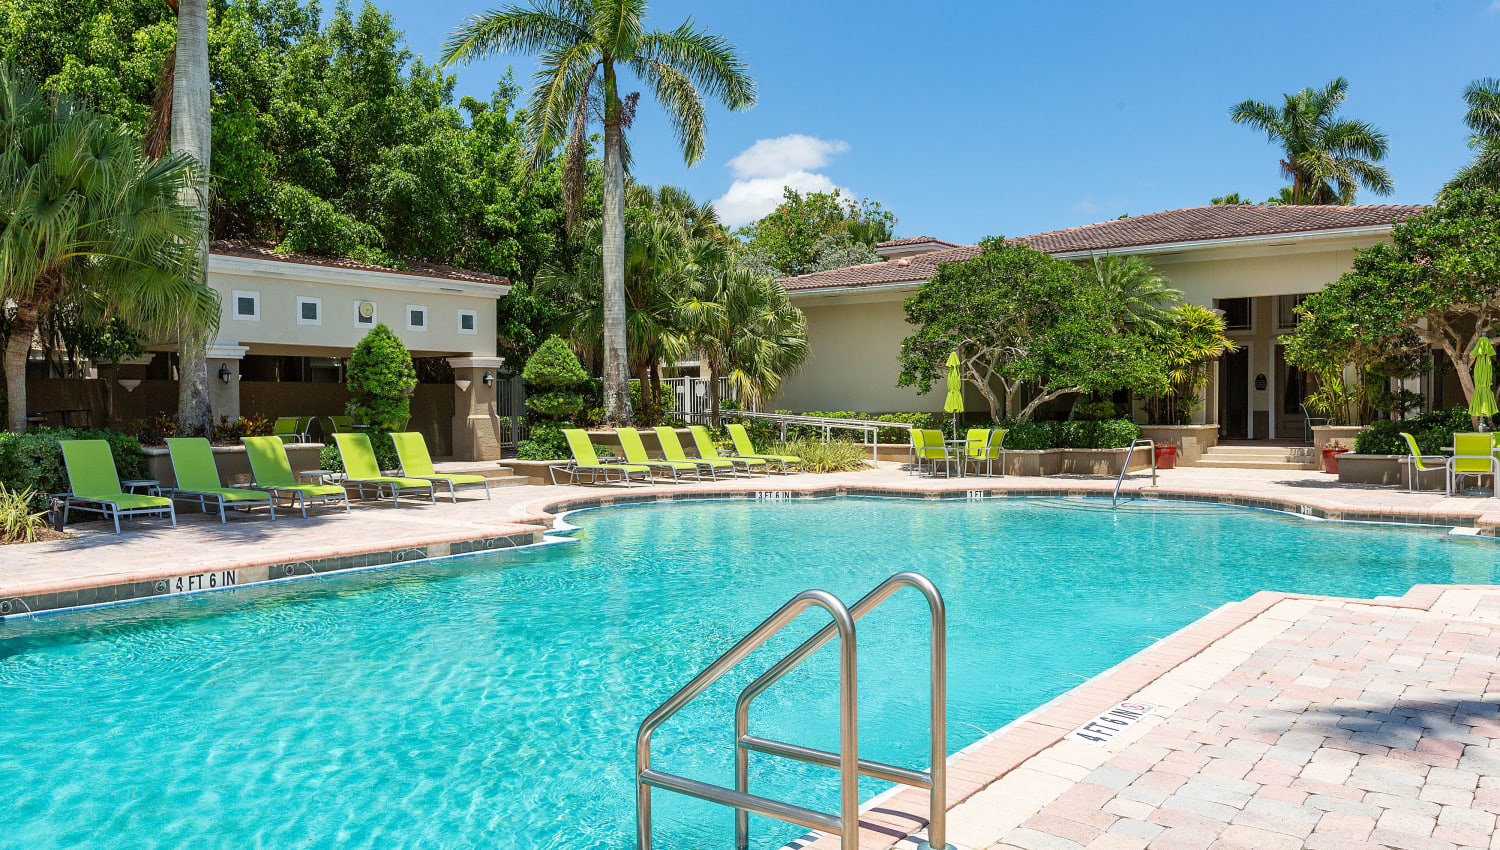 Pool area at Ibis Reserve Apartments in West Palm Beach, Florida